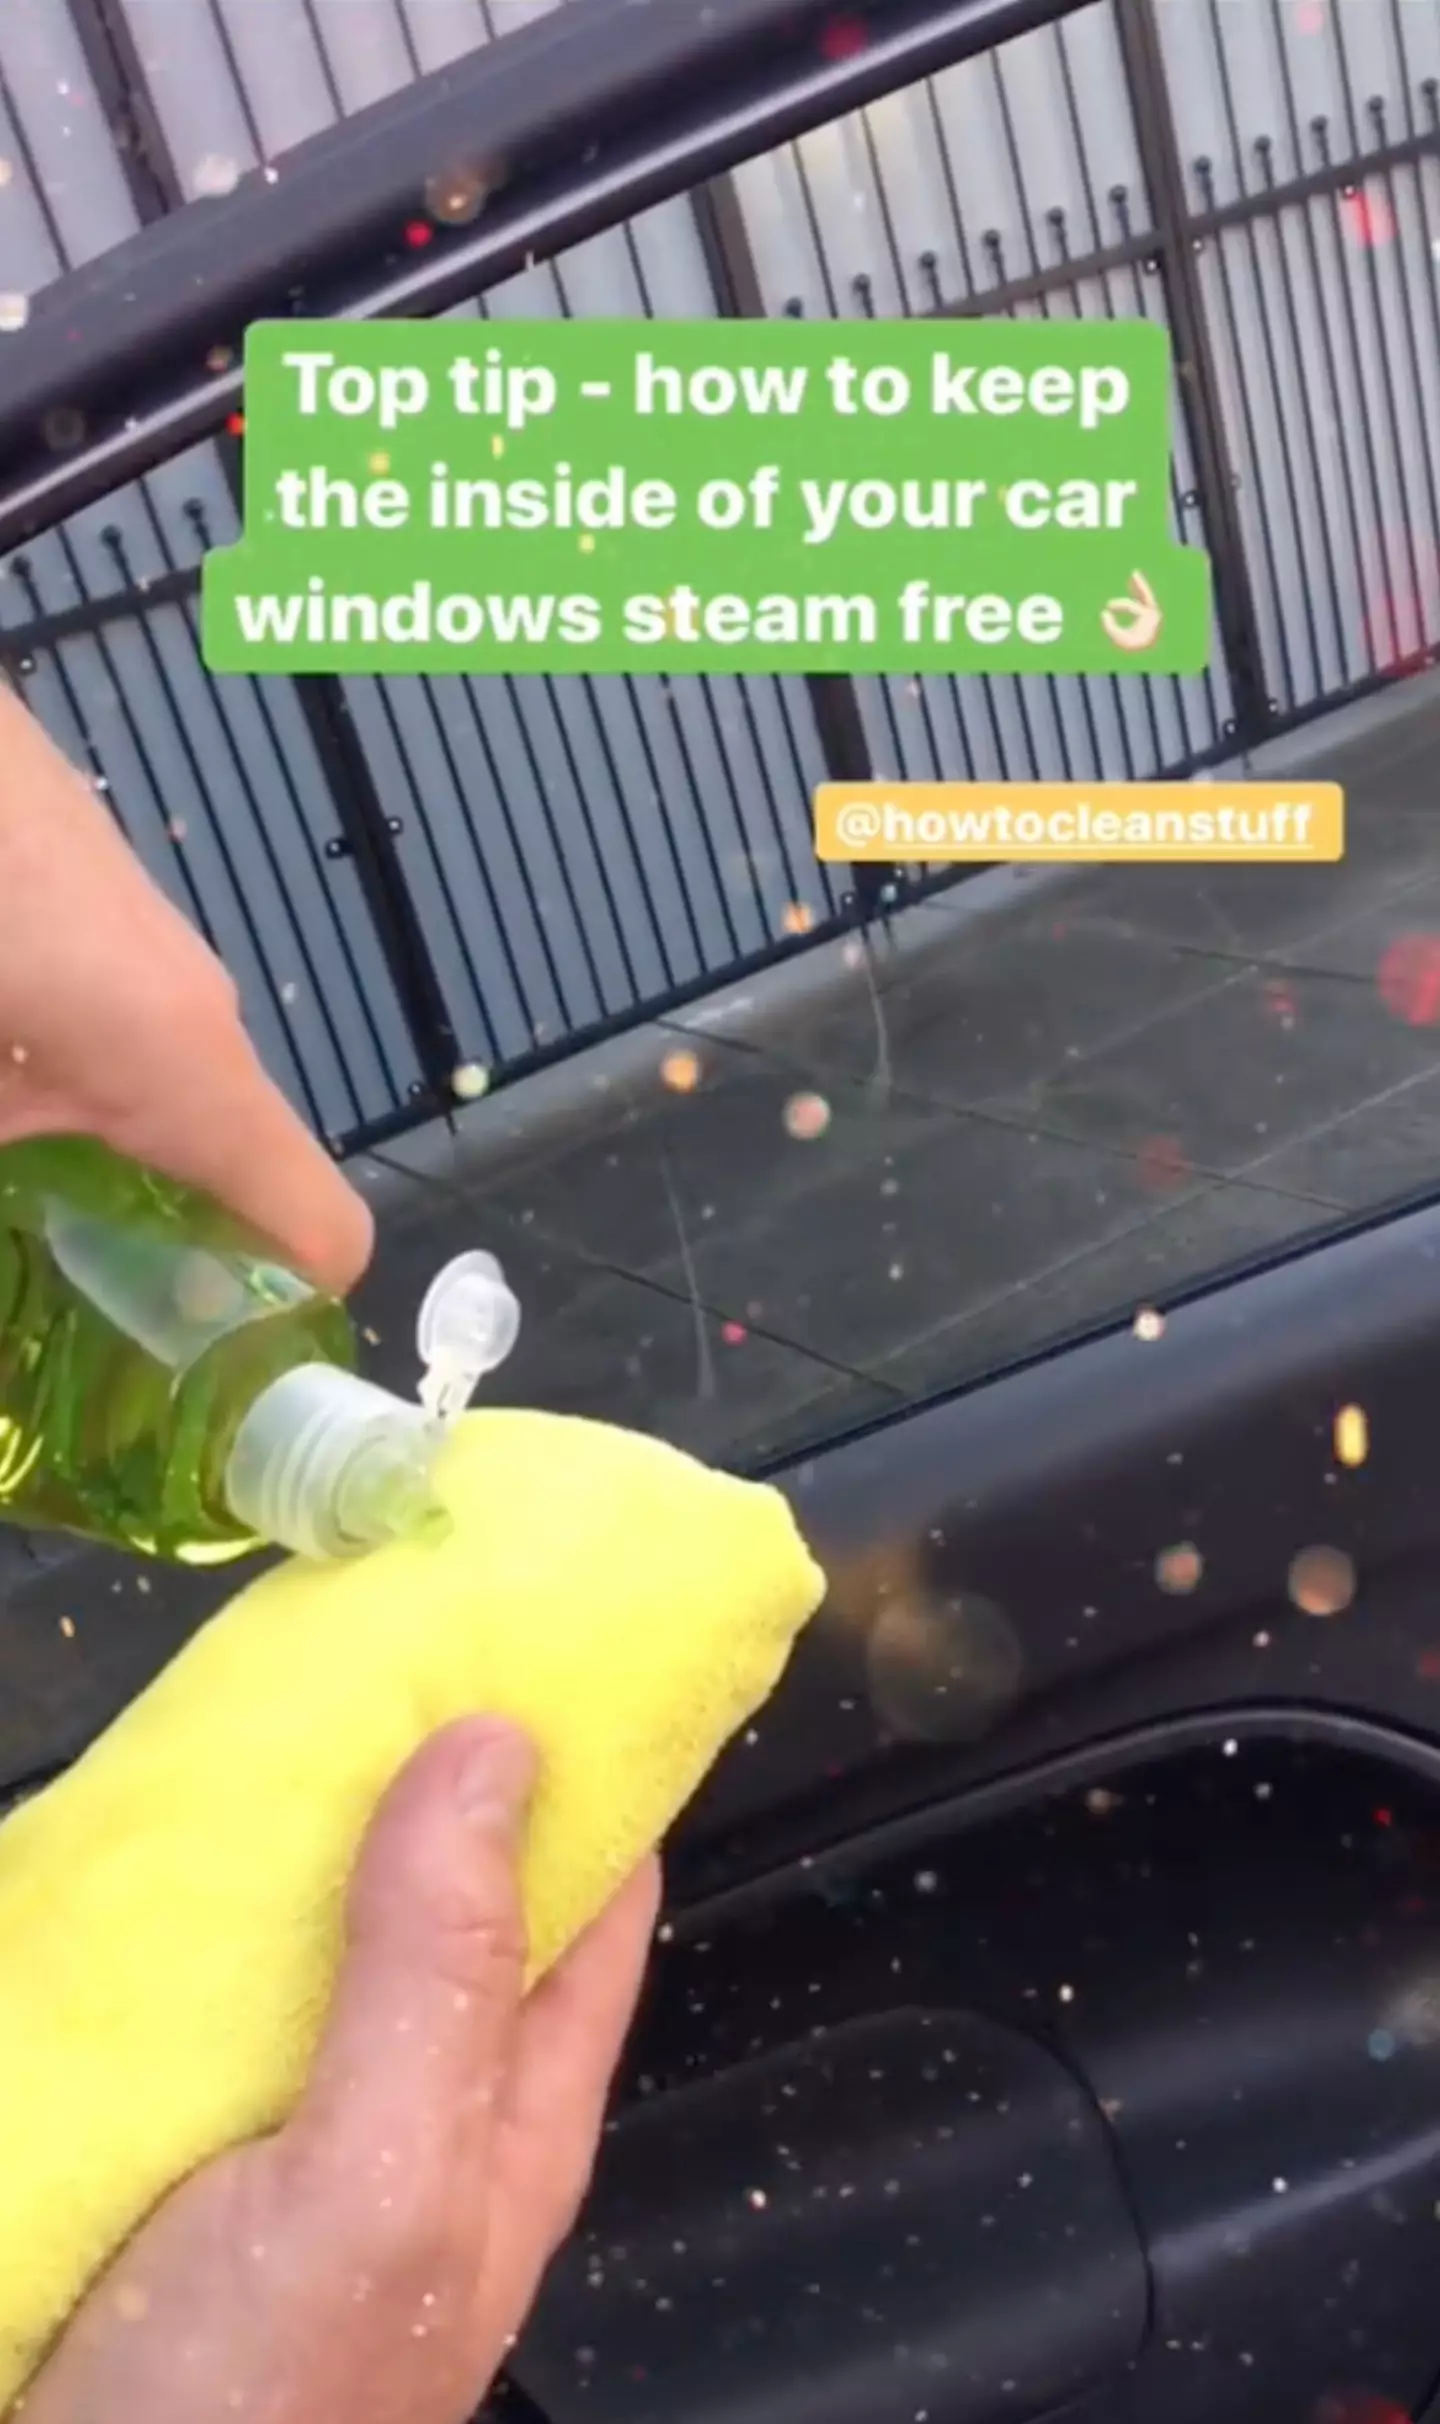 The cheap and cheerful hack should stop your windows from steaming up.